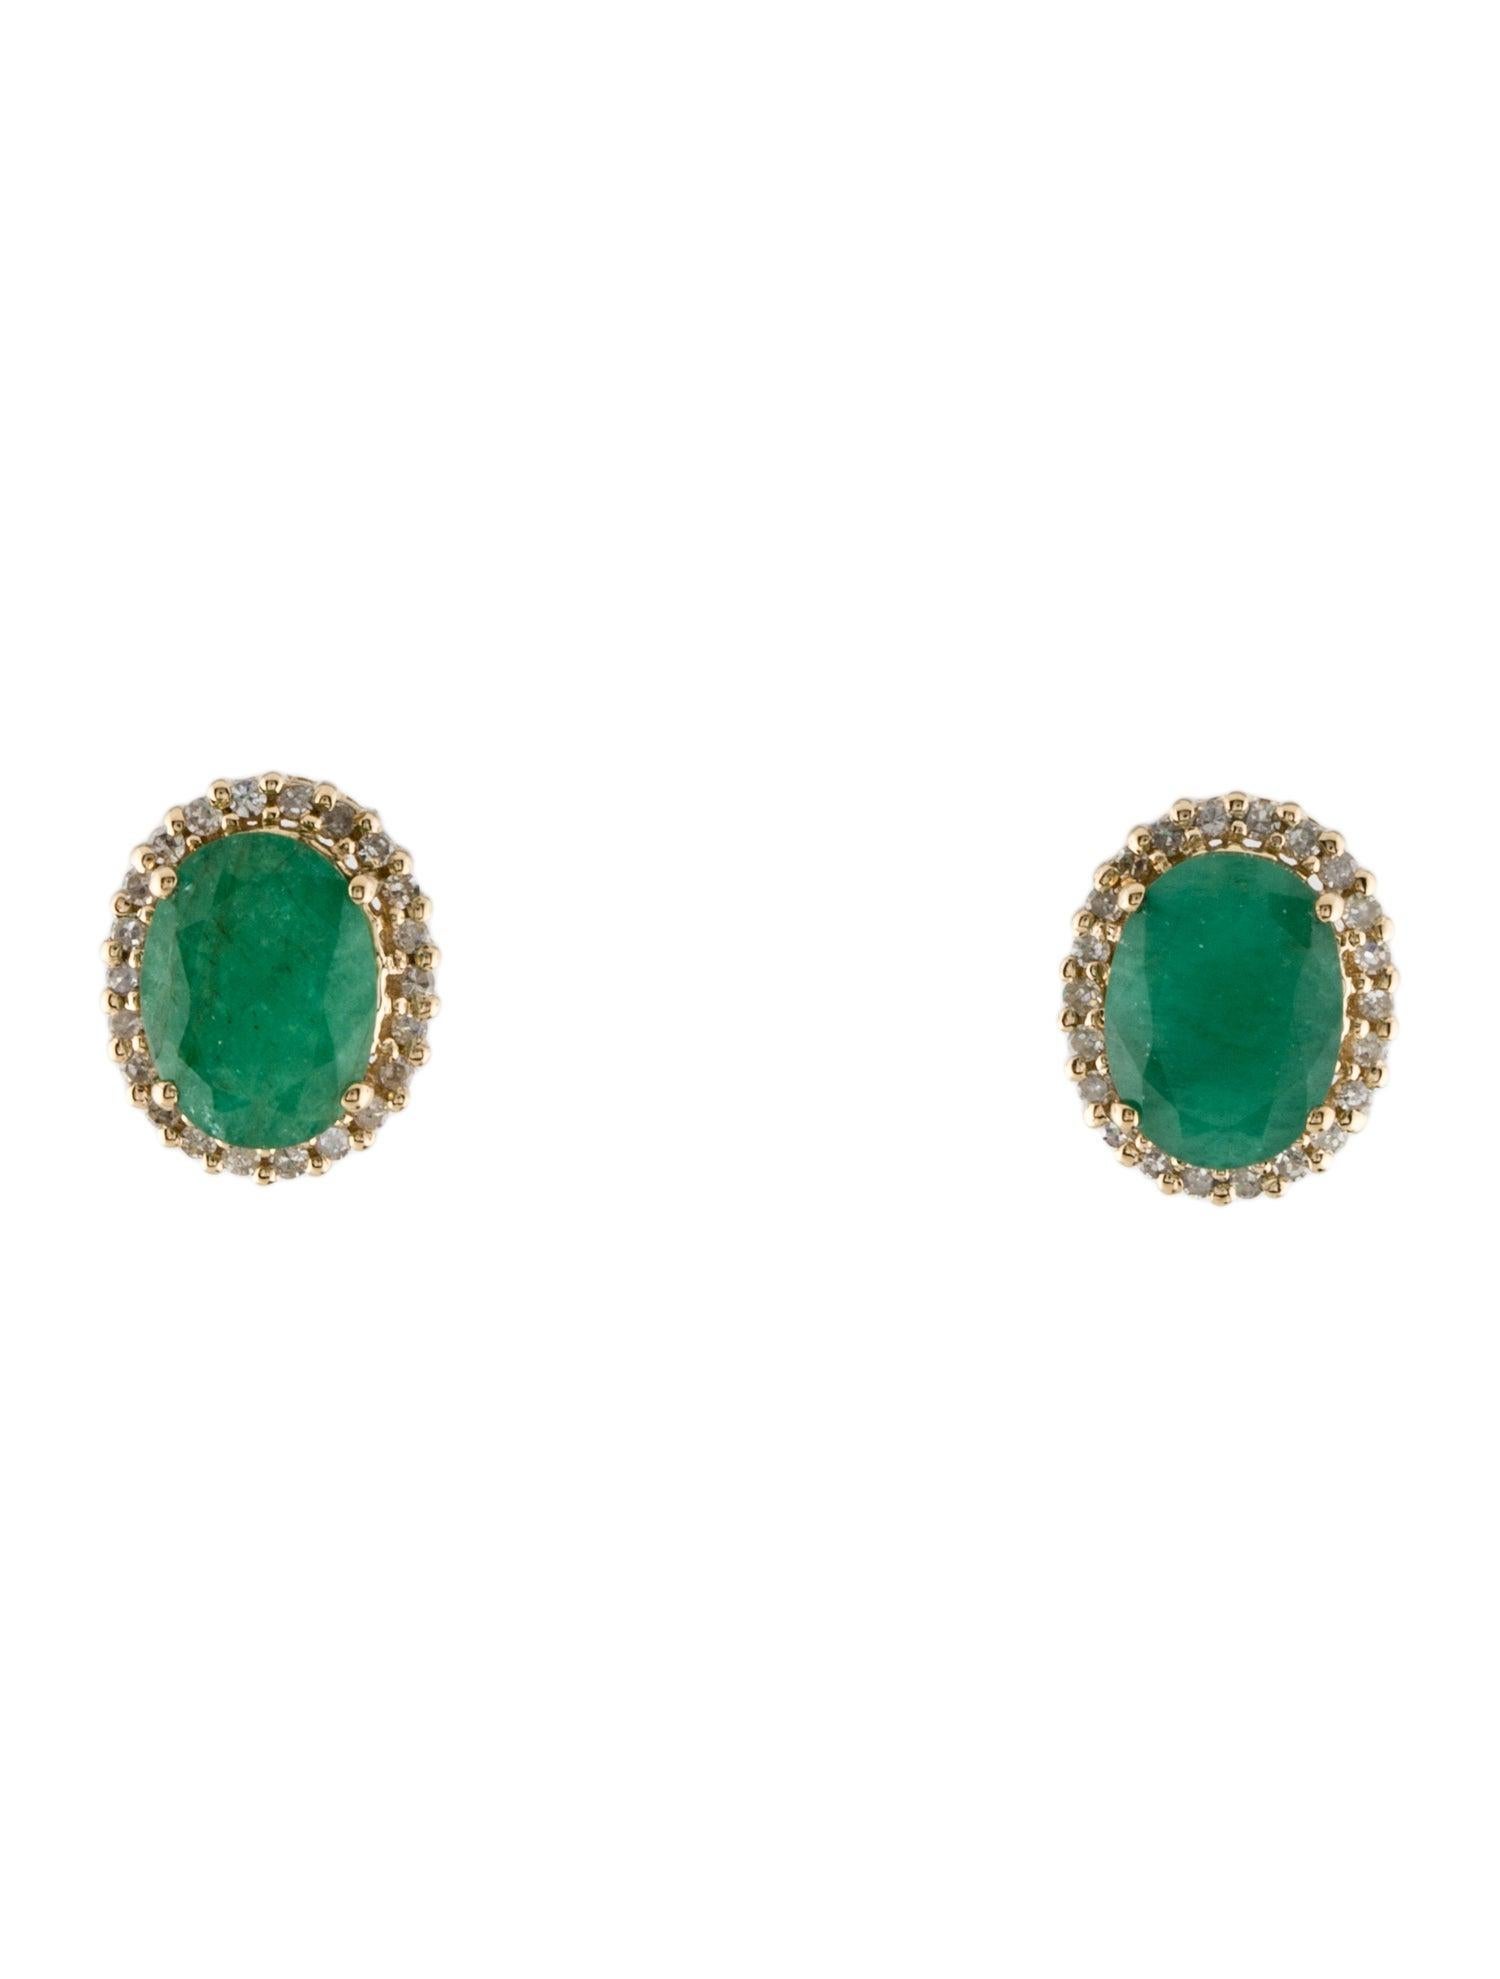 Introducing our luxurious 14K Yellow Gold Stud Earrings, featuring two oval modified brilliant Emeralds totaling 2.08 carats, complemented by forty-four near colorless, single-cut diamonds with a total carat weight of 0.17. These earrings elegantly